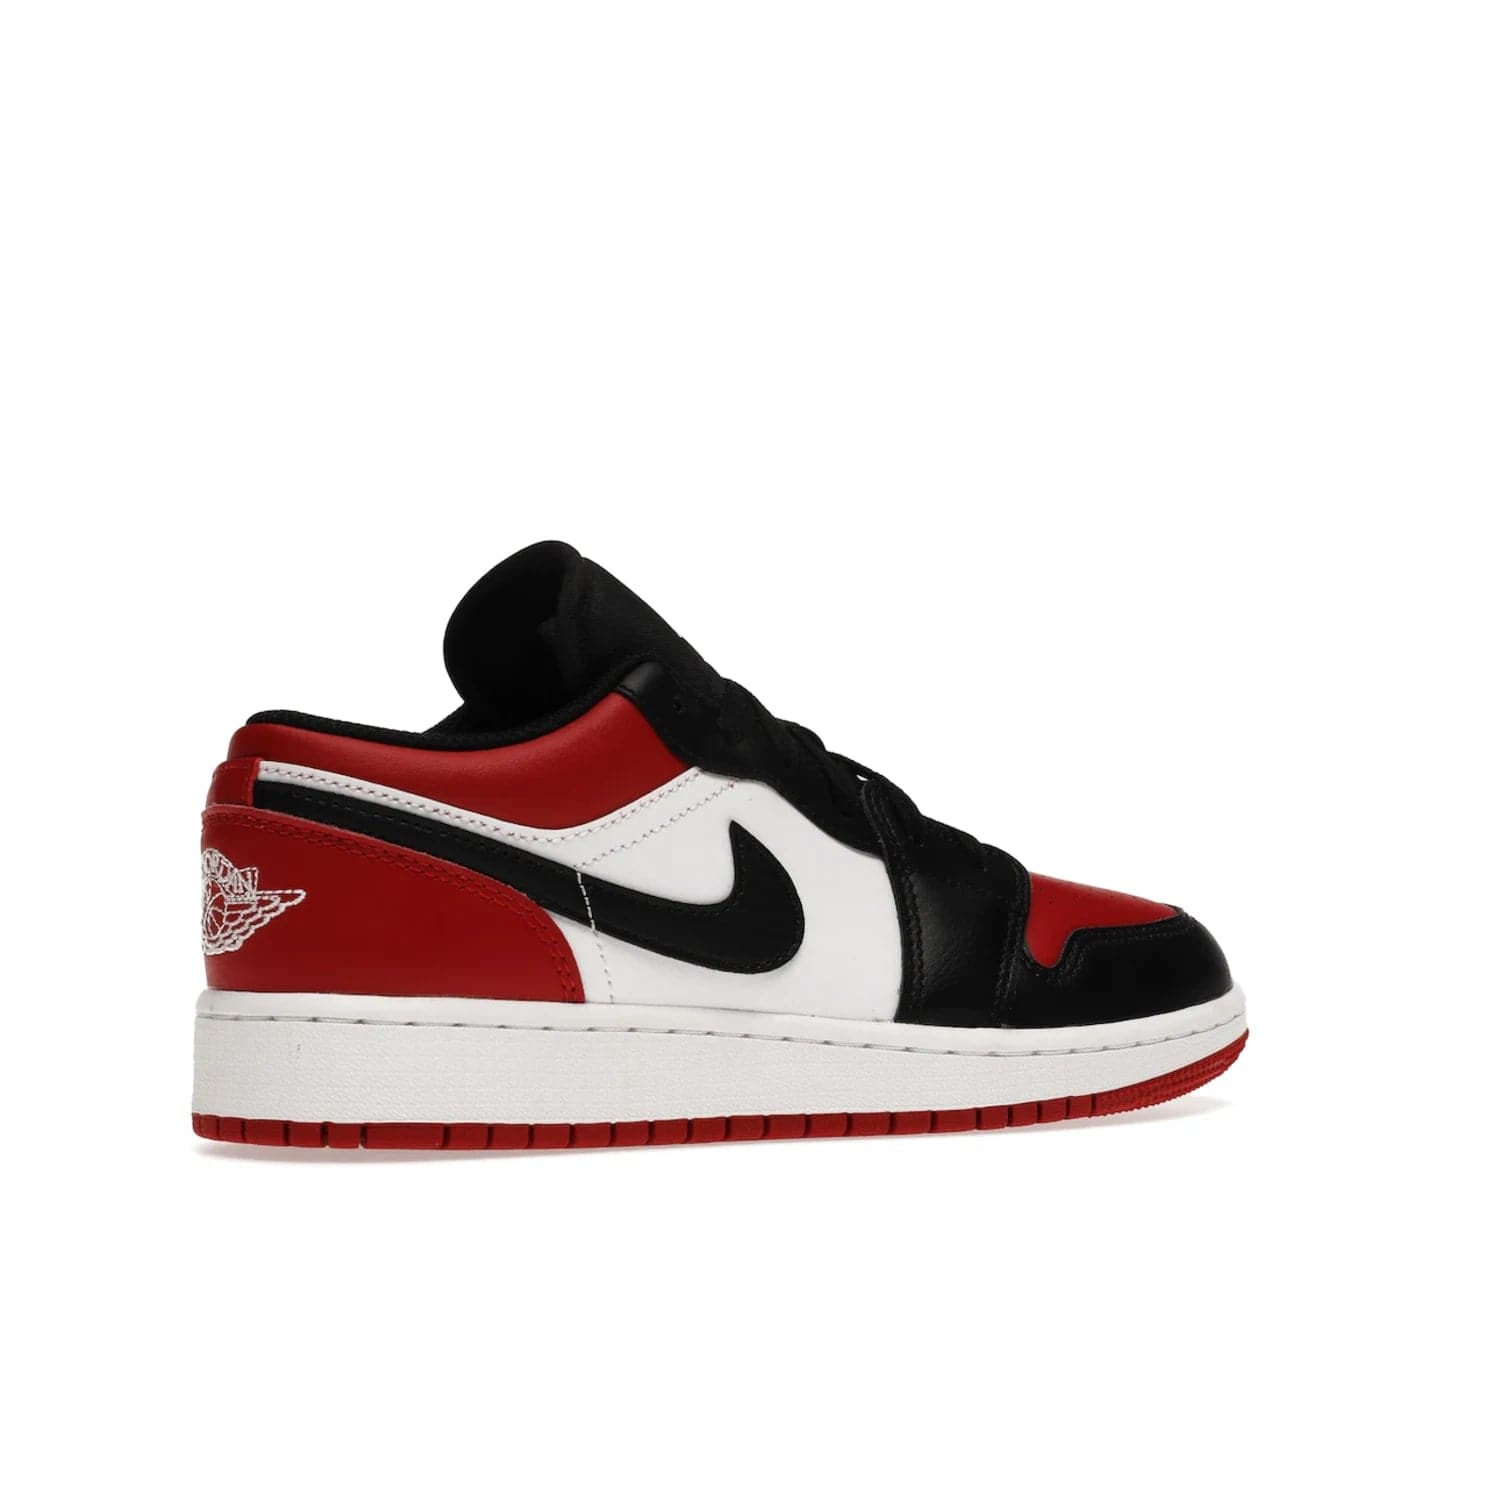 Jordan 1 Low Bred Toe (GS) - Image 34 - Only at www.BallersClubKickz.com - #
Iconic sneaker from Jordan brand with classic colorway, unique detailing & Air Jordan Wings logo. Step into the shoes of the greats with the Jordan 1 Low Bred Toe GS!